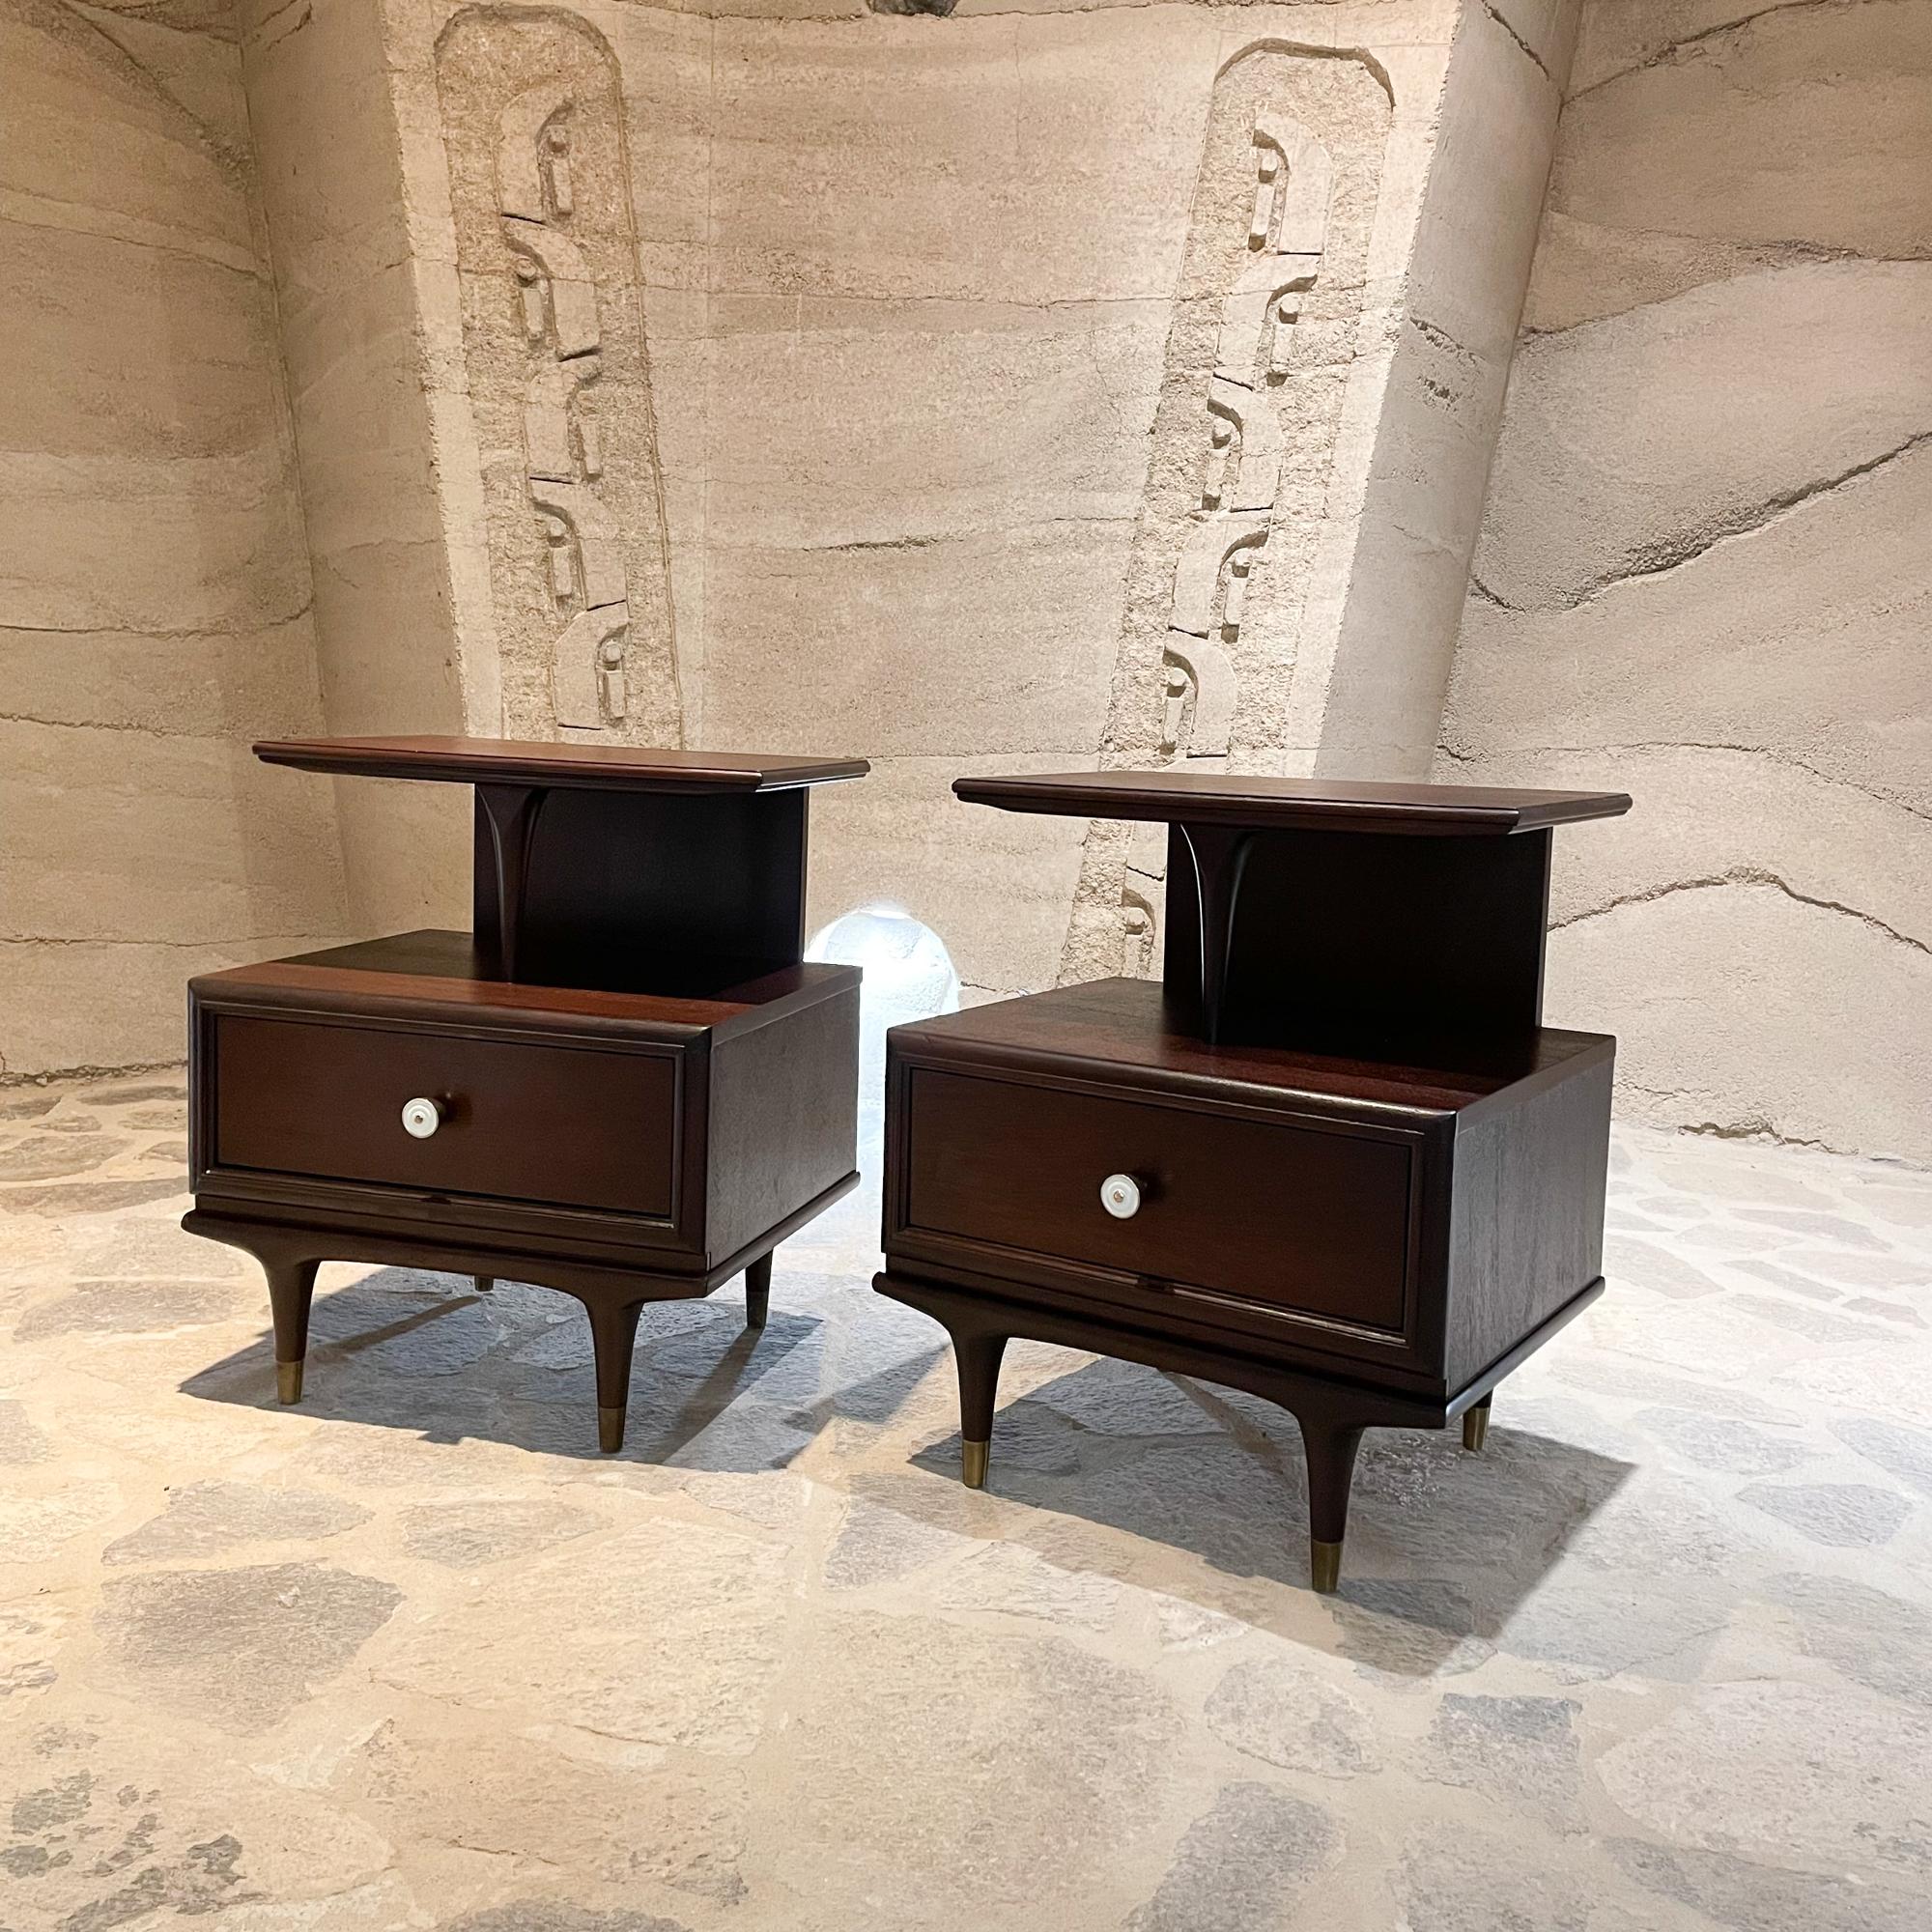 1960s Kent Coffey The Continental Fabulous Nightstands Sculptural Side Tables in Mahogany Wood with Espresso Finish
Golden Brass Tipped Legs
Midcentury Modern from Burnett's Fine Furniture of San Diego, California
Maker stamp present.
Two tiered